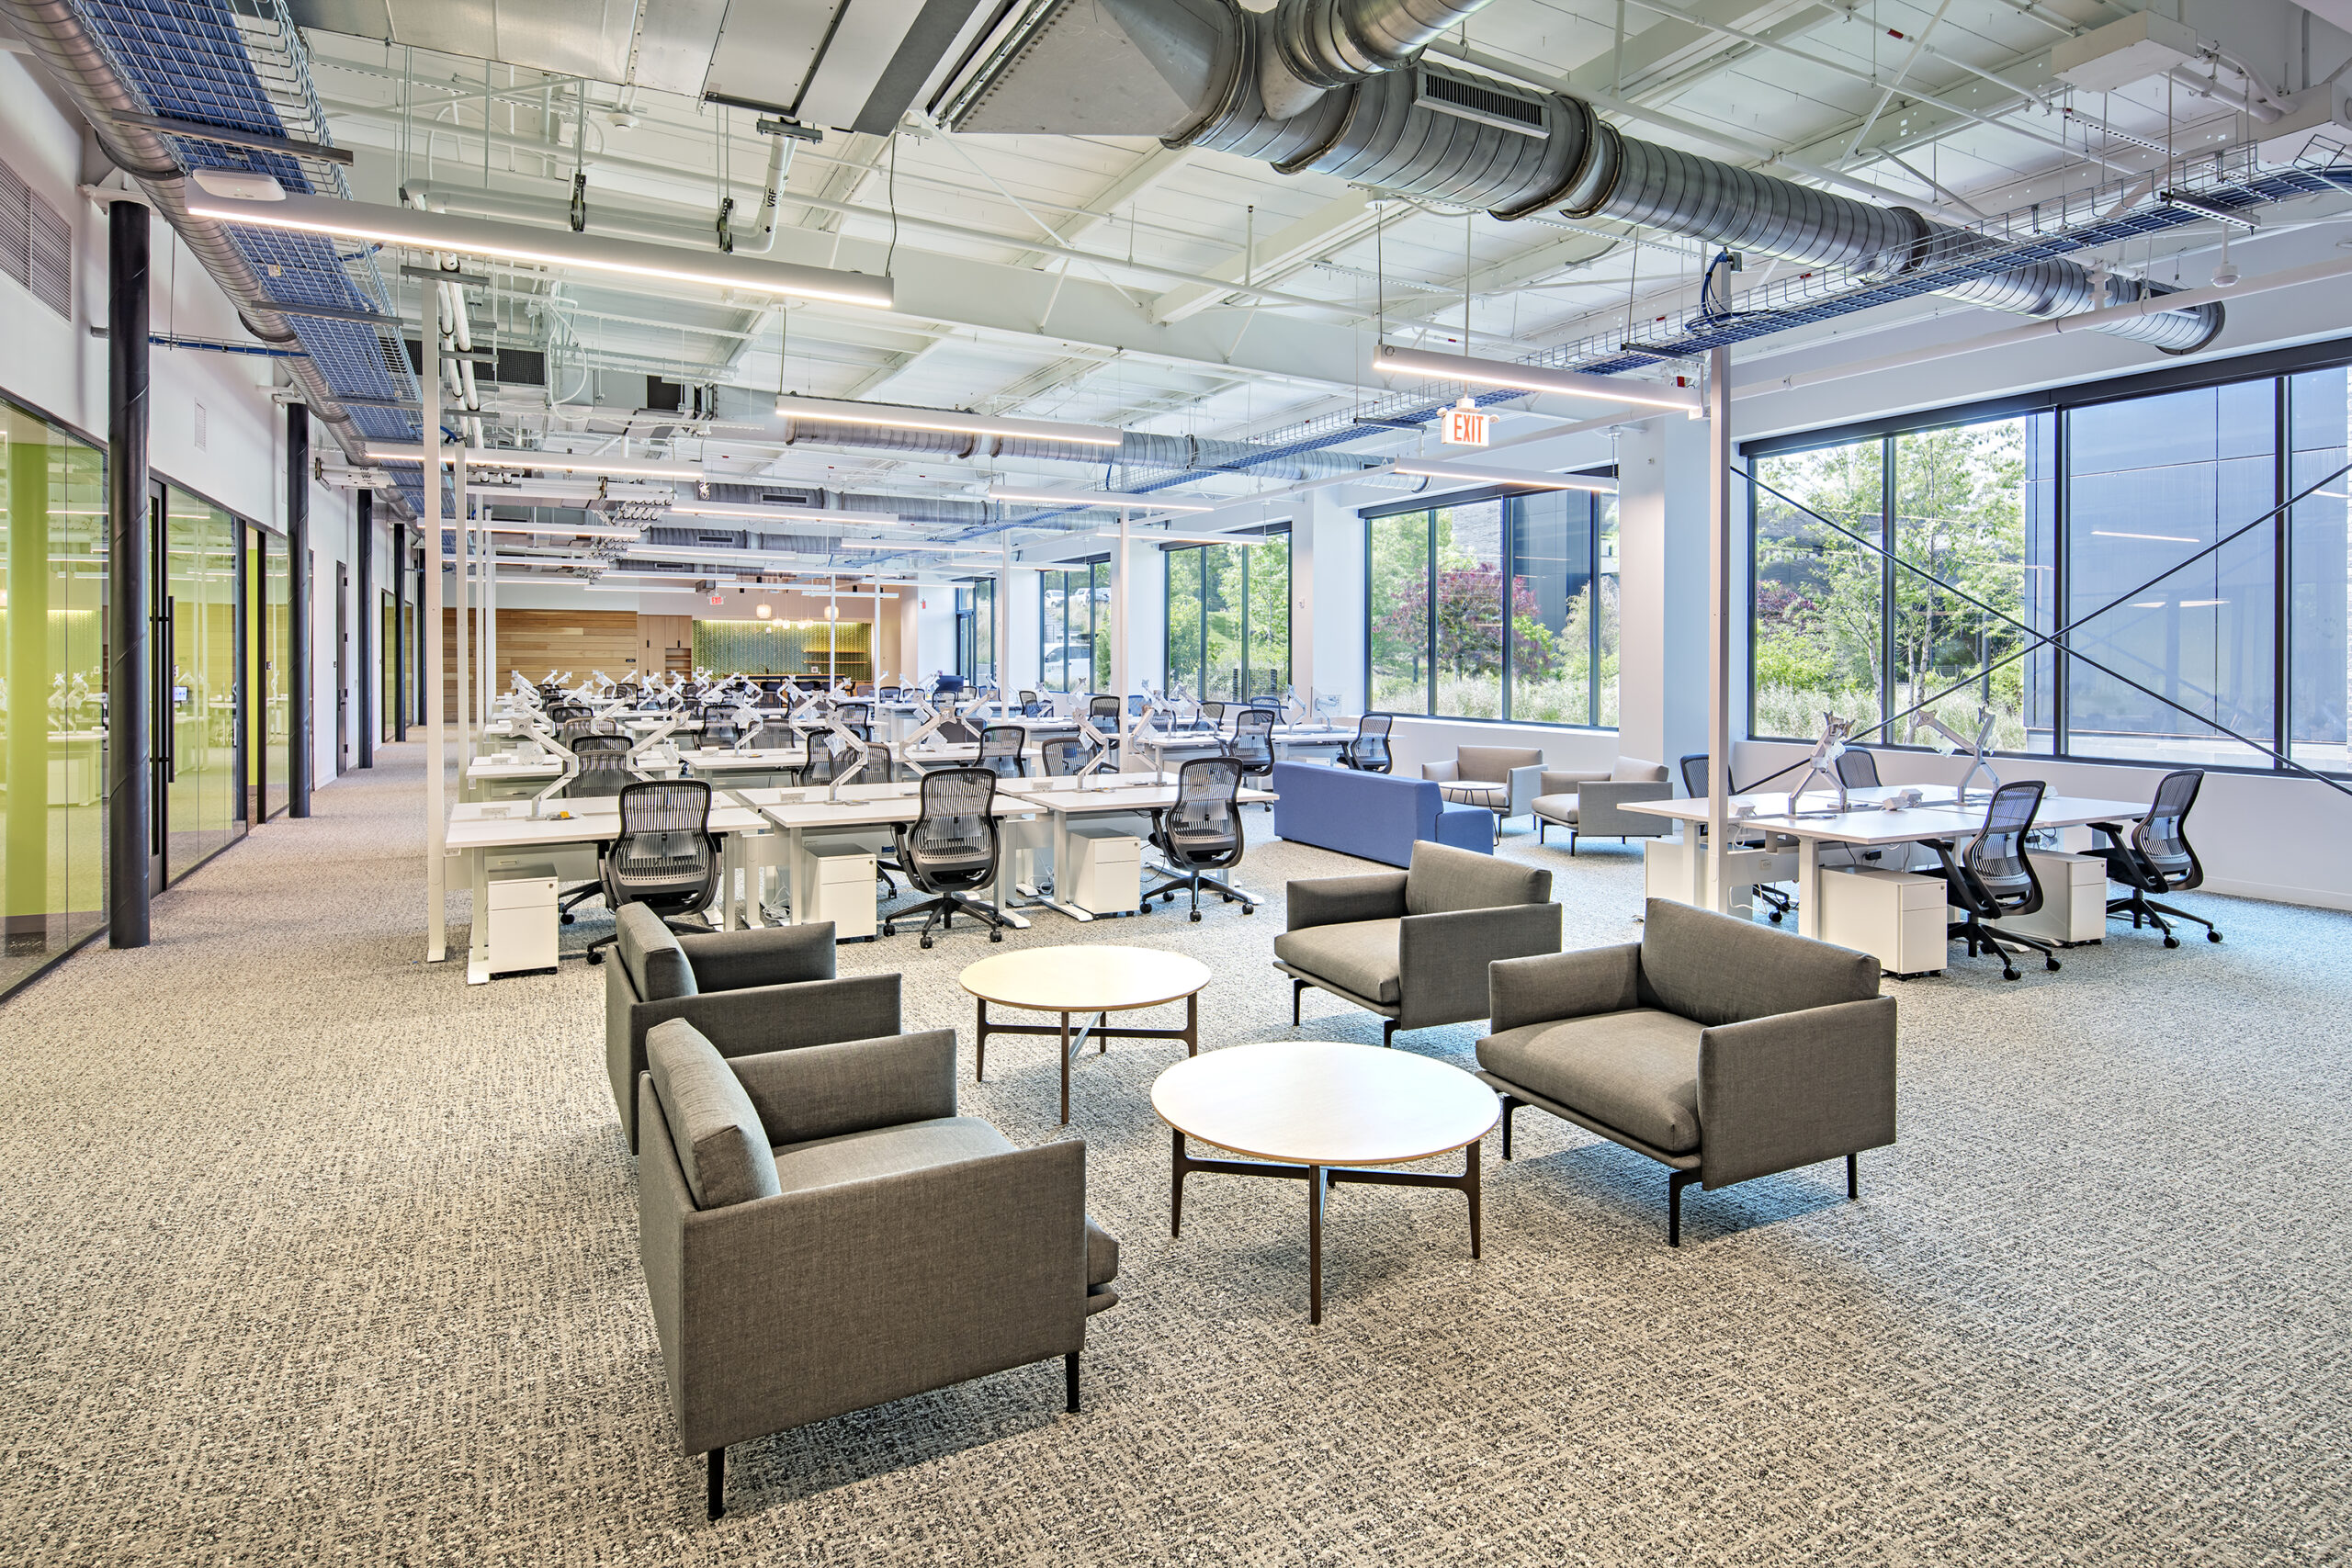 Invitae's open office work area with conference rooms - photo